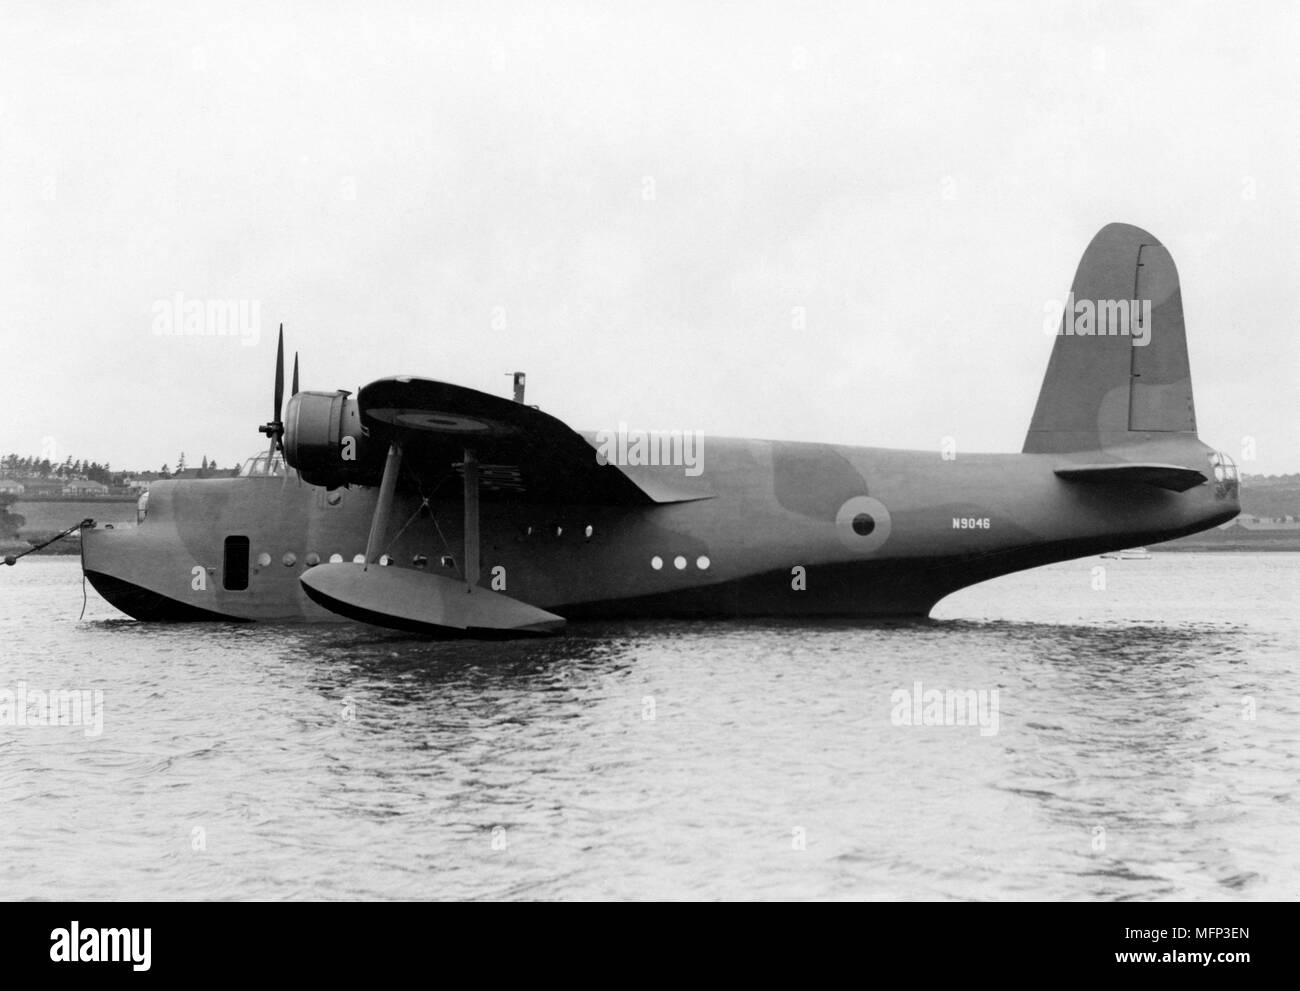 N9046, the first Sunderland Flying Boat to fight of 6 JU88's in WWII near Invergordon.This earnt it the name, the Flying Porcupine.  Later damaged bey Stock Photo